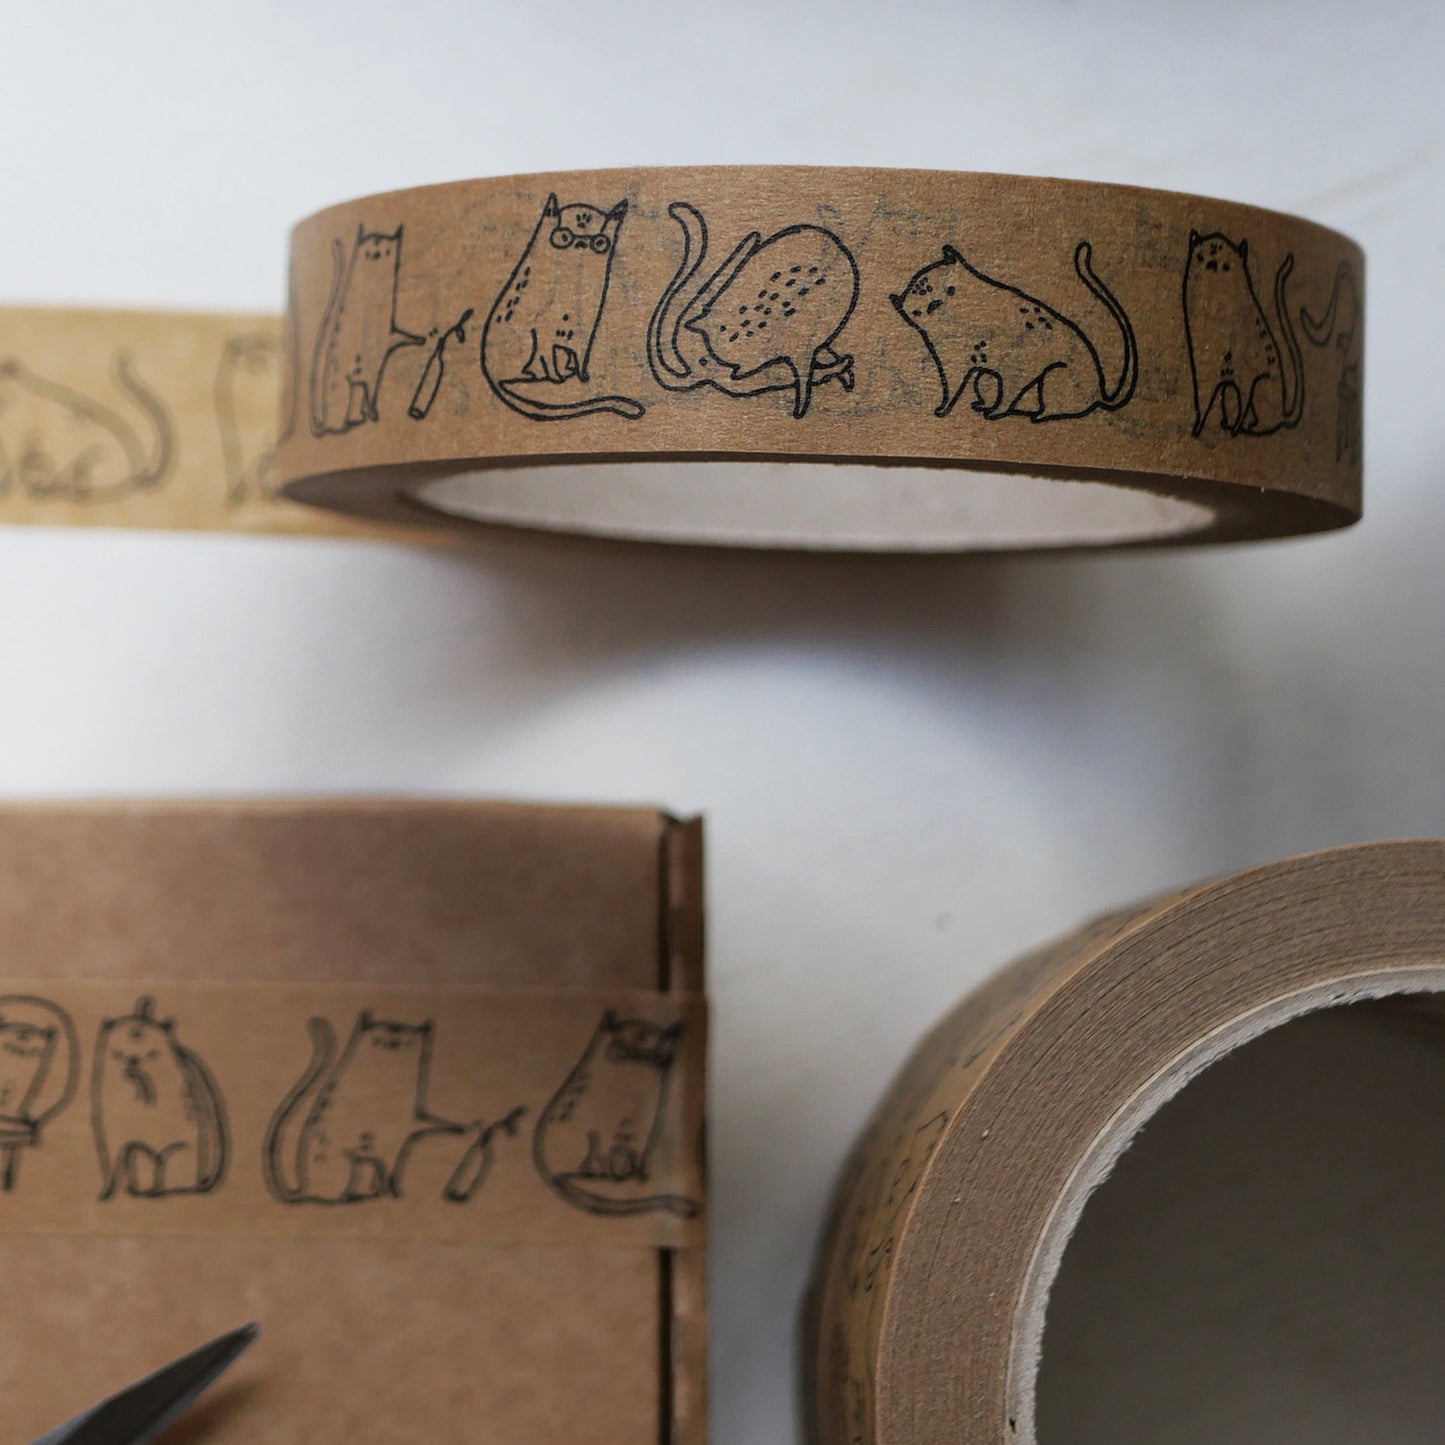 Paper tape - cats!